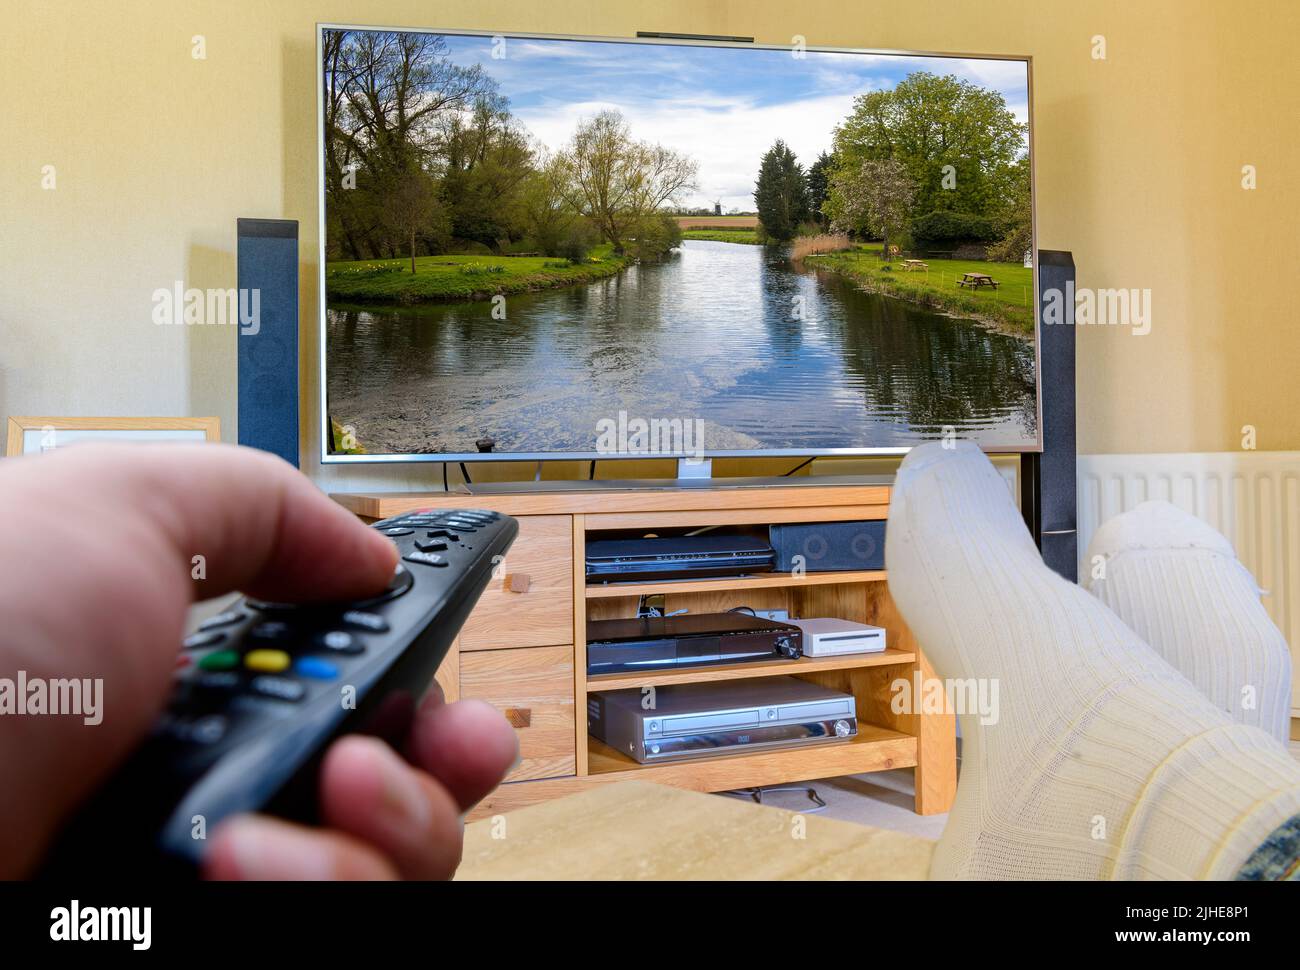 couch potato Man with feet up watching a large flat screen tv remote control in hand changing channels Stock Photo